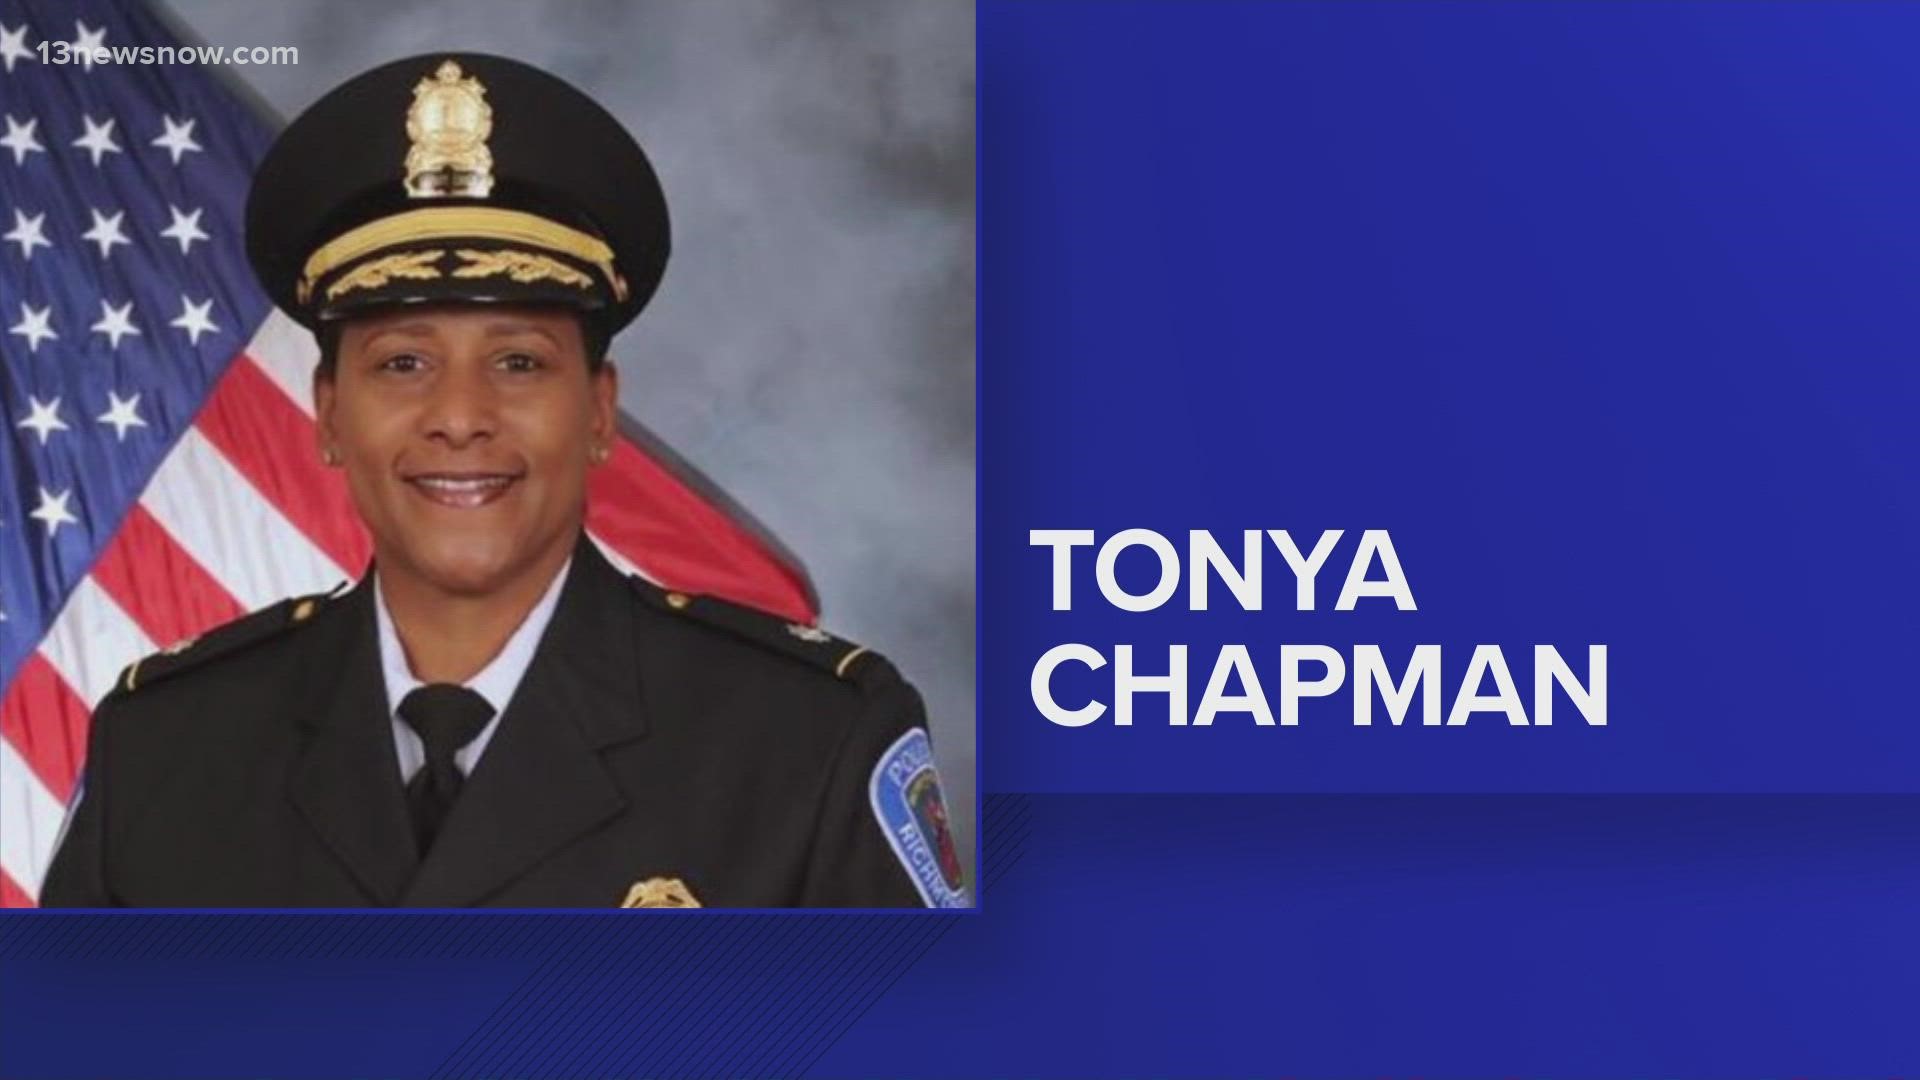 The council members negotiating her contract want to offer Tonya Chapman a two-year severance pay totaling $400,000 if she’s fired within the first year.